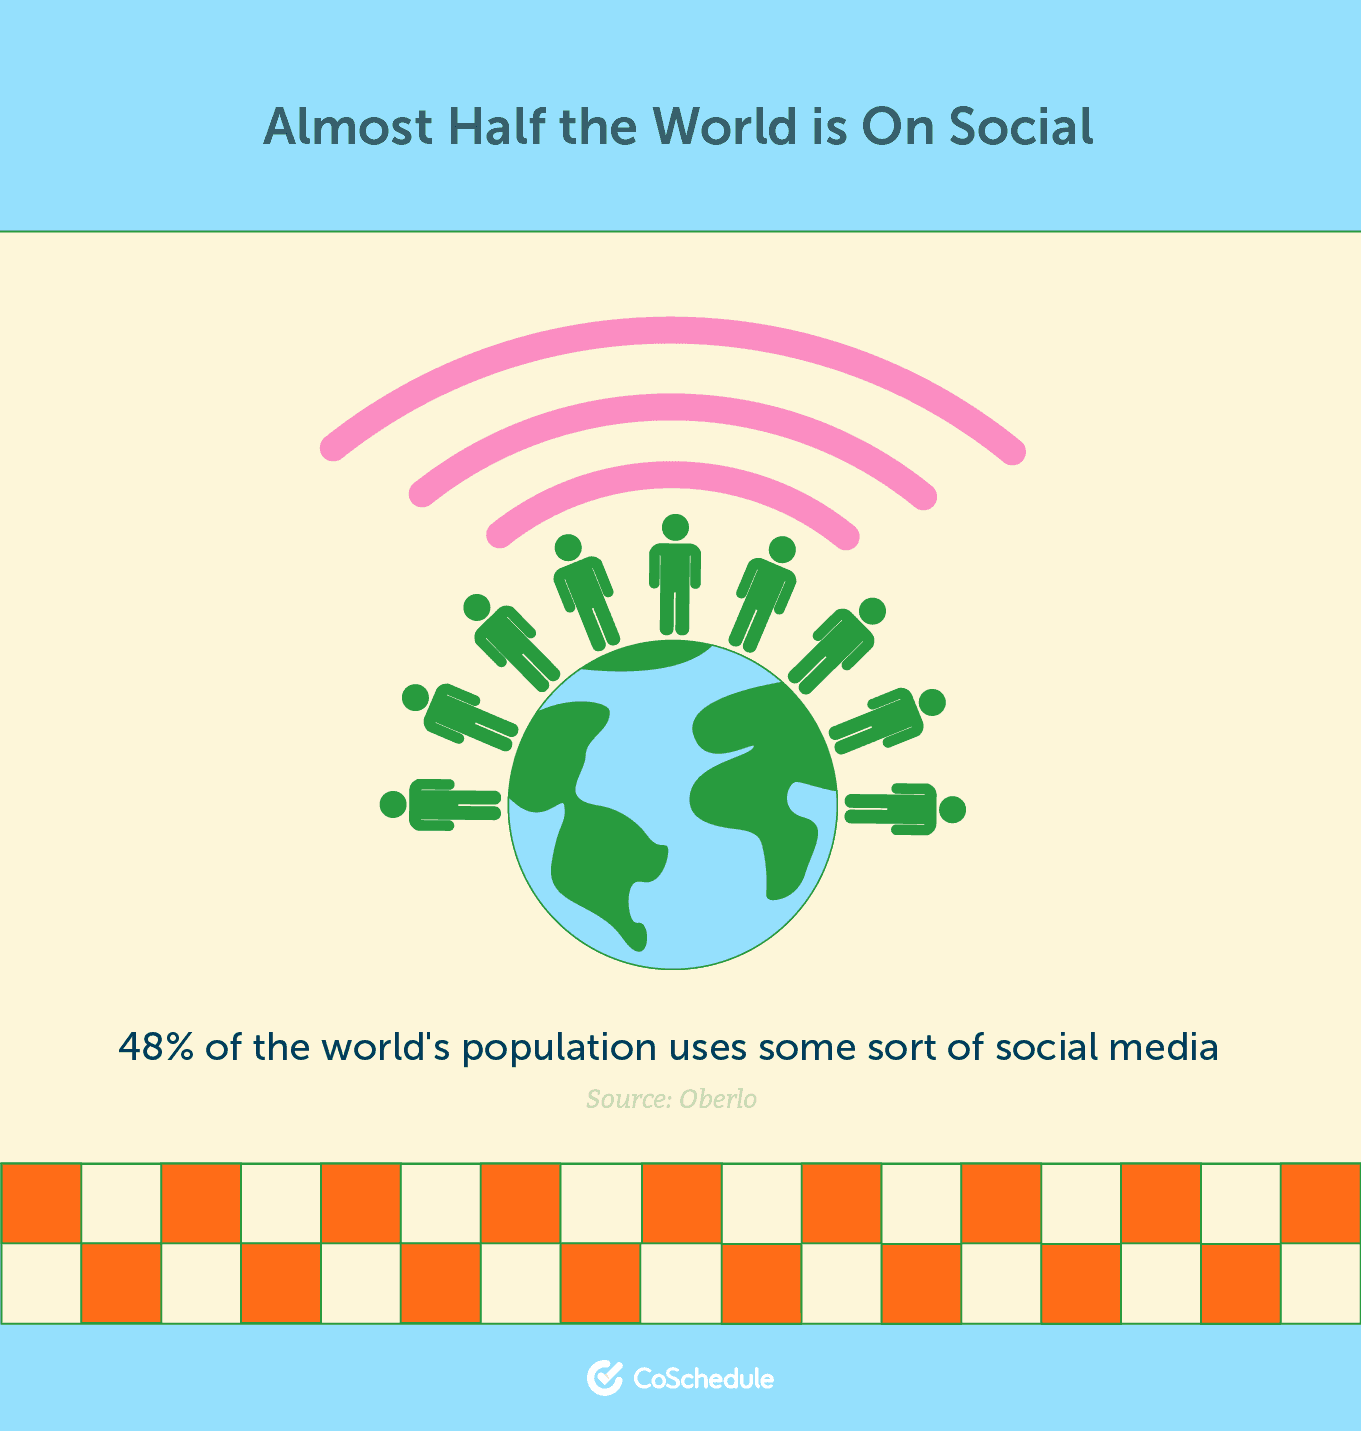 Almost half the world is on social